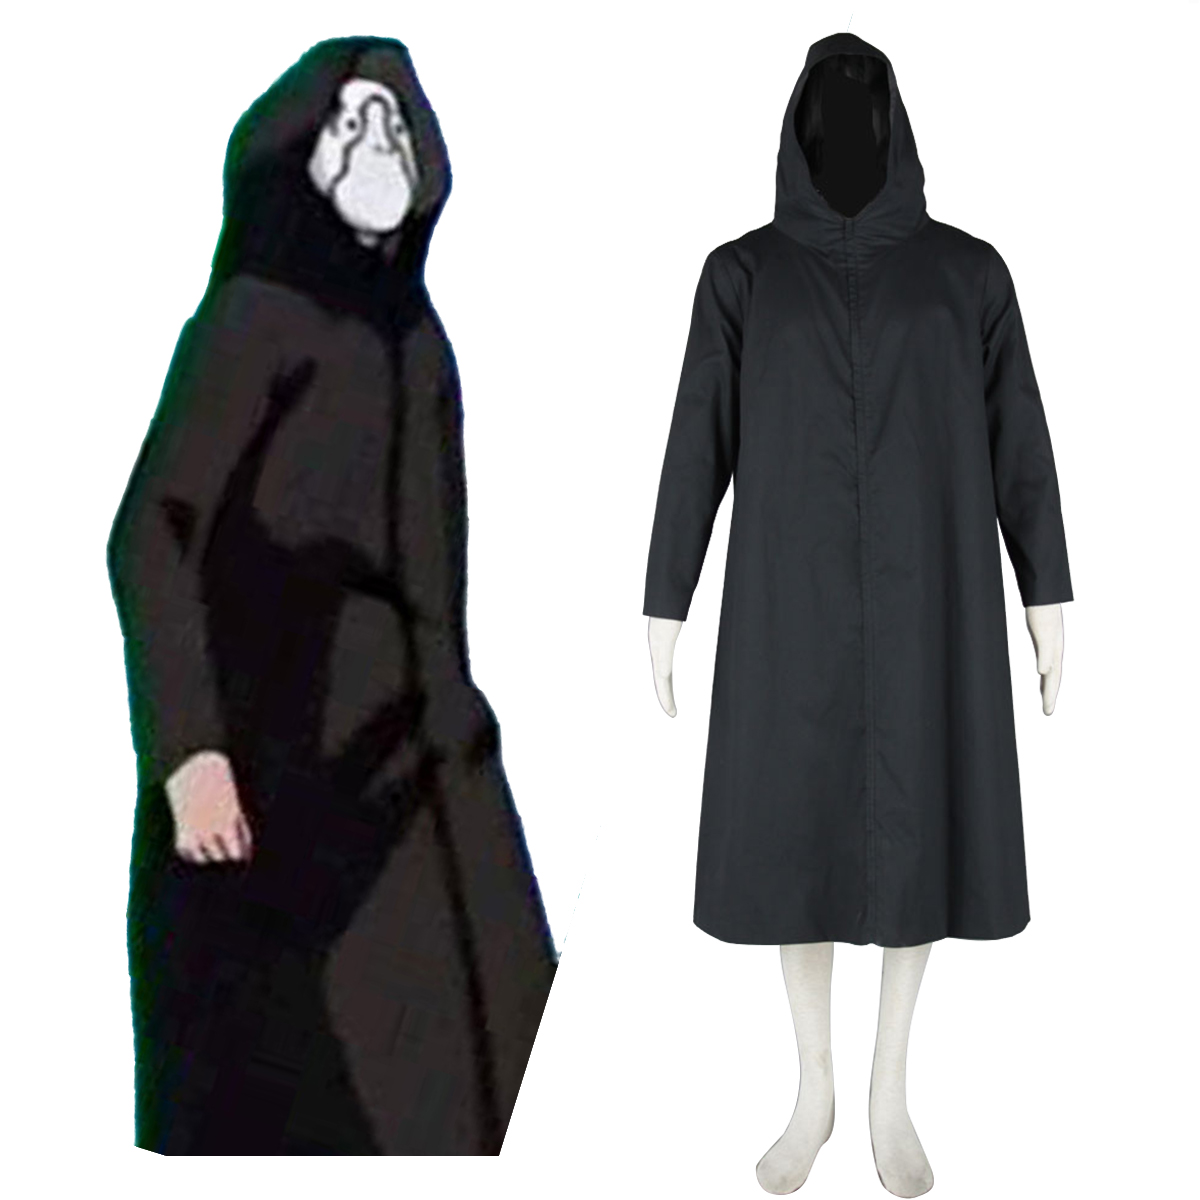 Naruto ANBU Cloak 2 Black Anime Cosplay Costumes Outfit